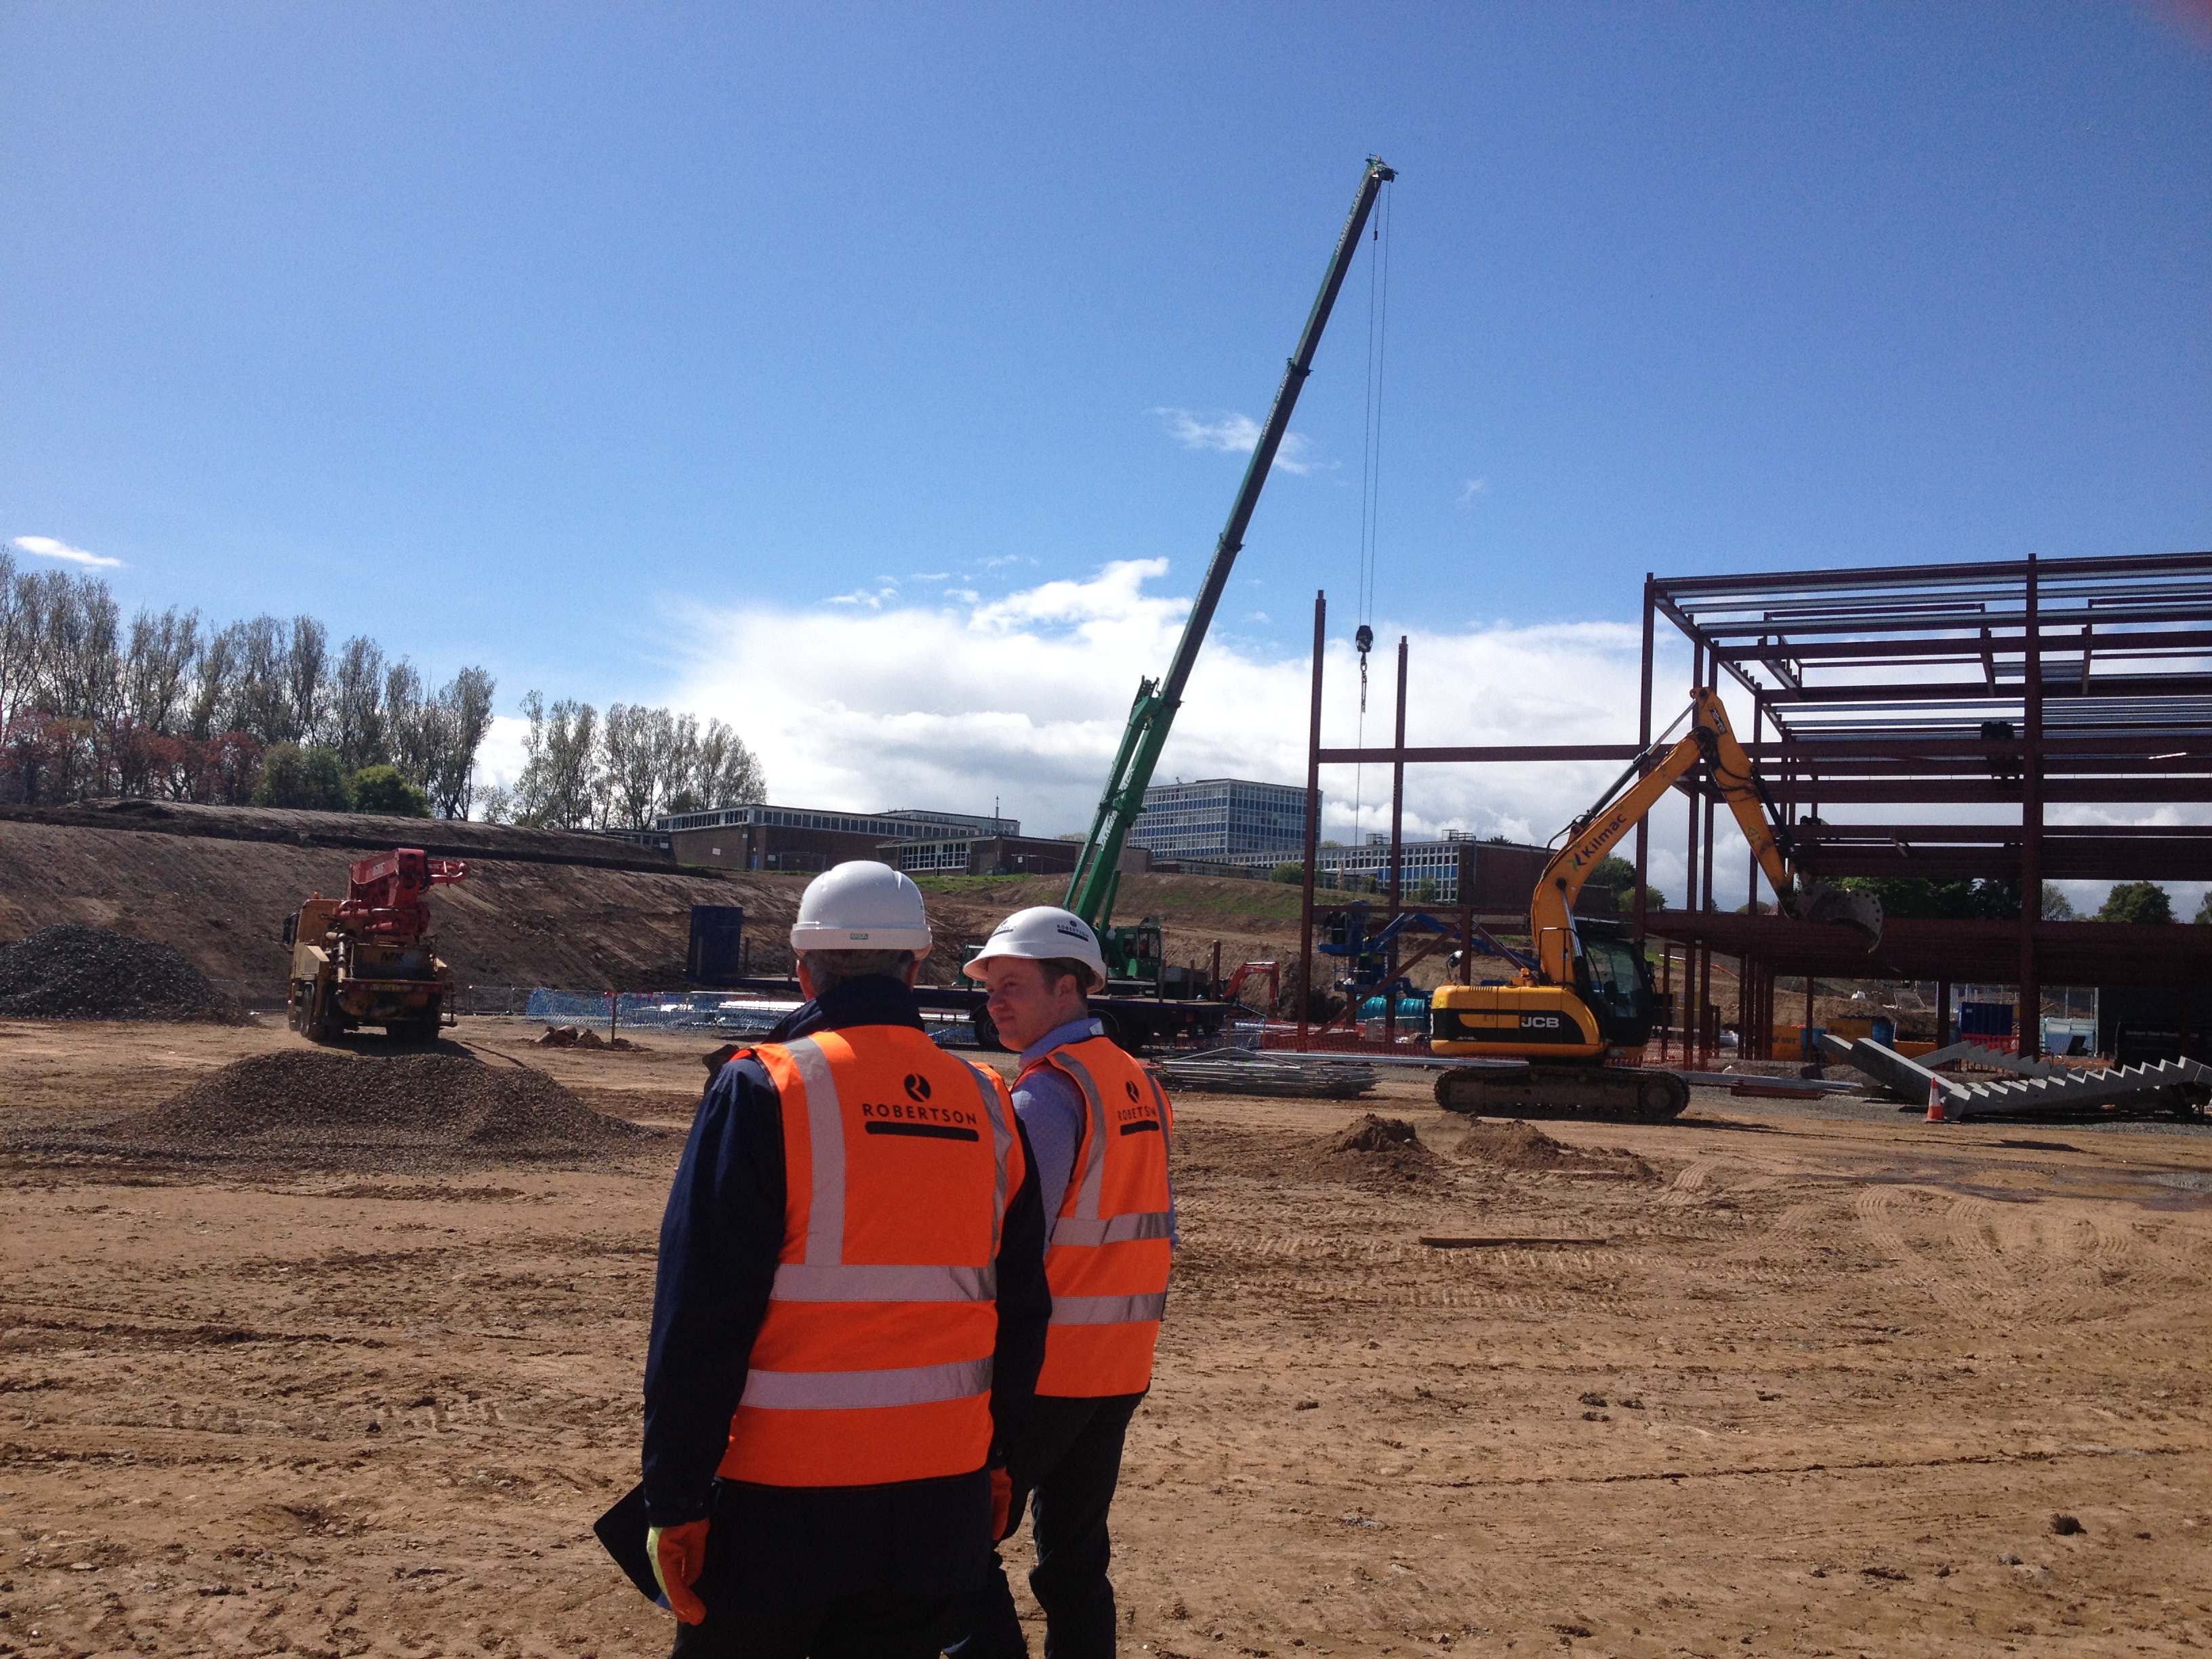 Mr Hearn on our 1st site visit